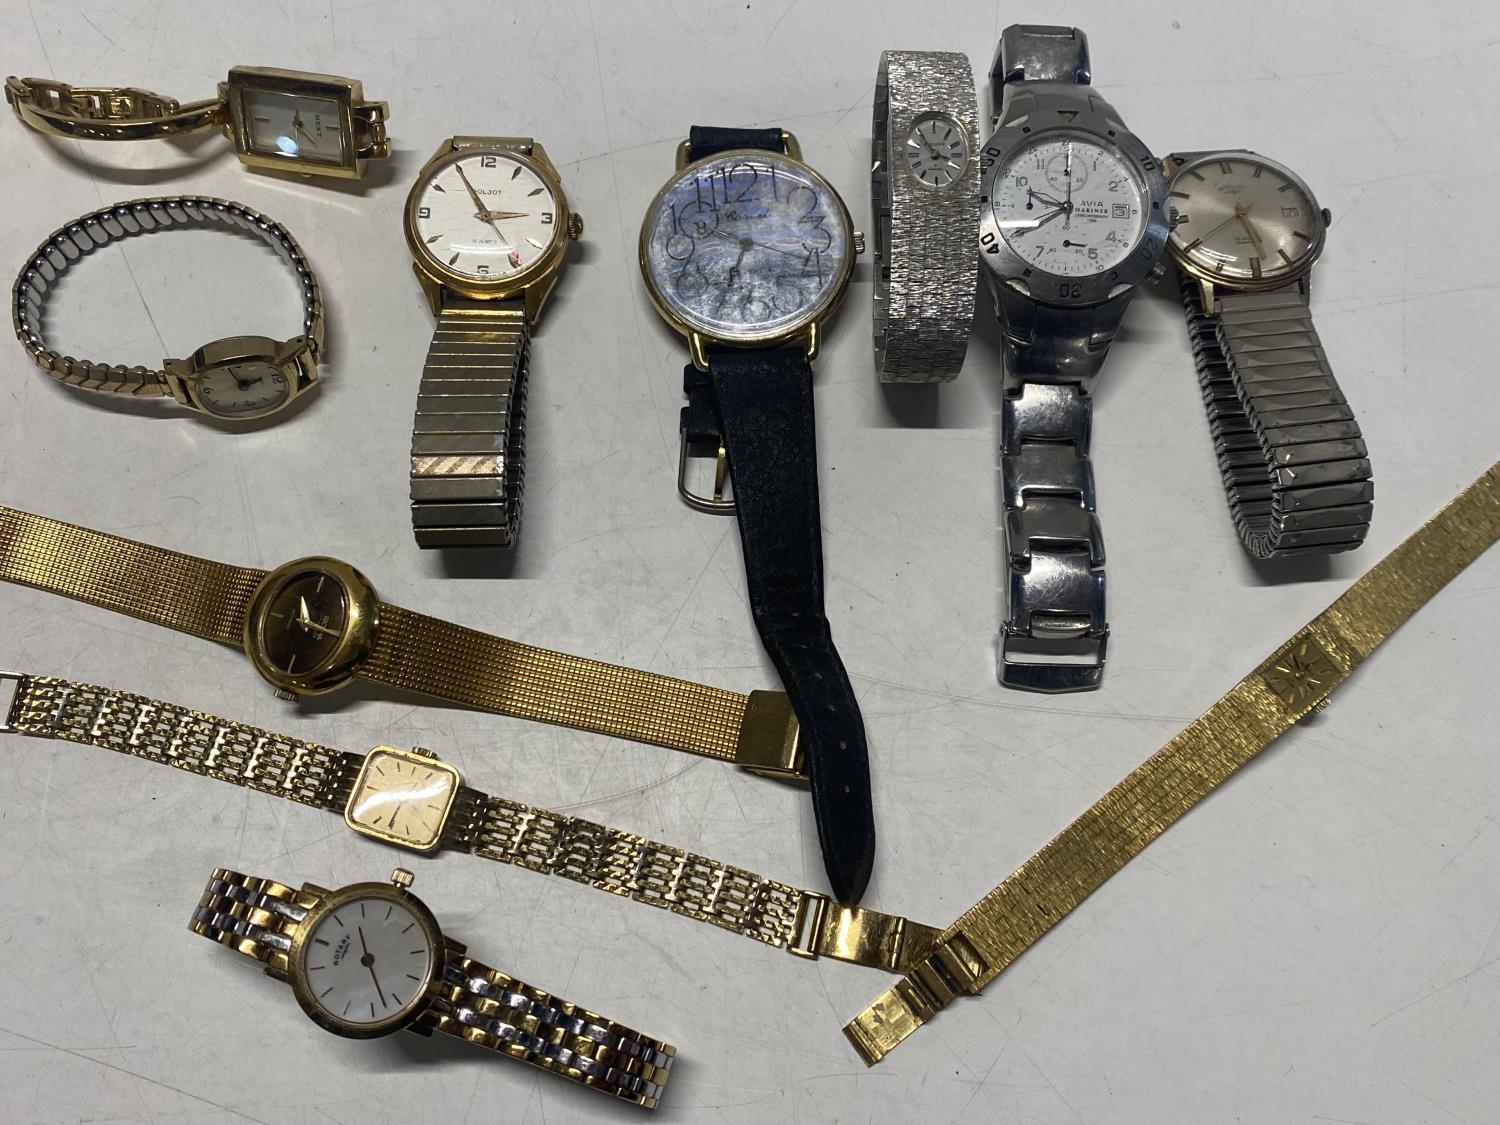 A job lot of assorted watches including men's and women's a/f